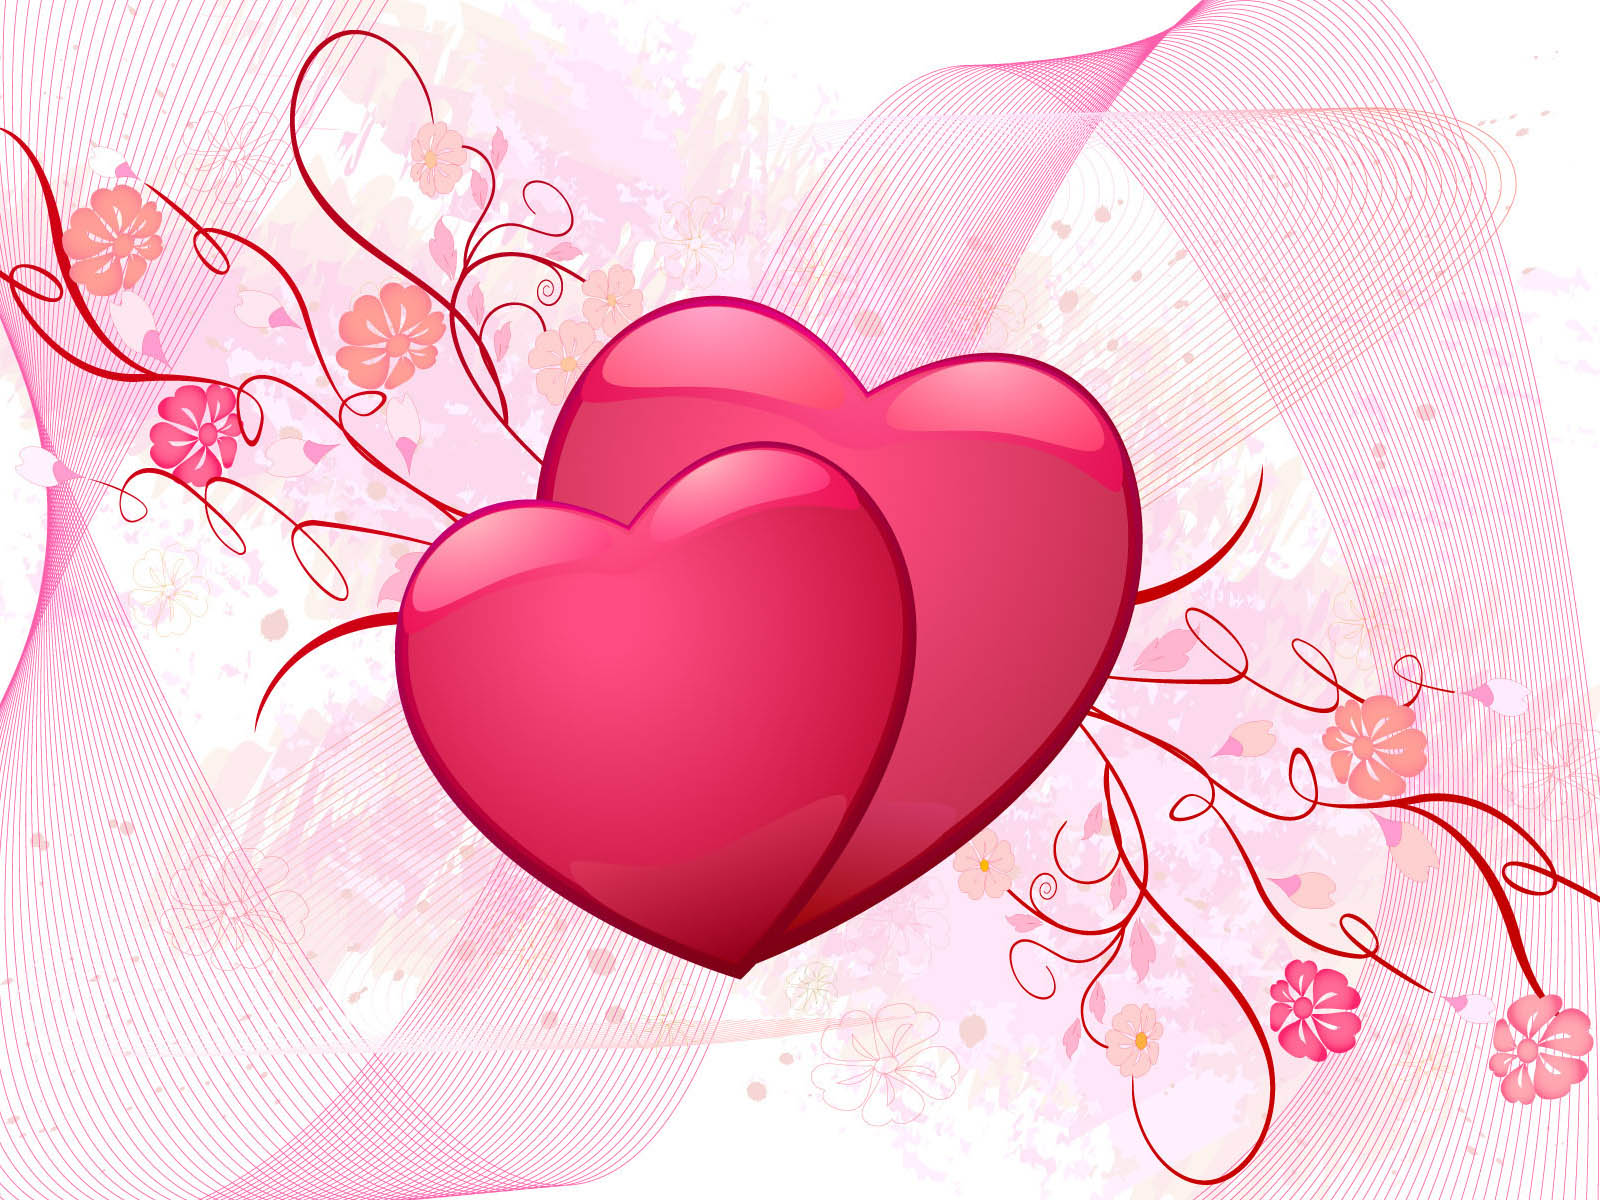 Tag Love Heart Wallpaper Image Photos Pictures And Background